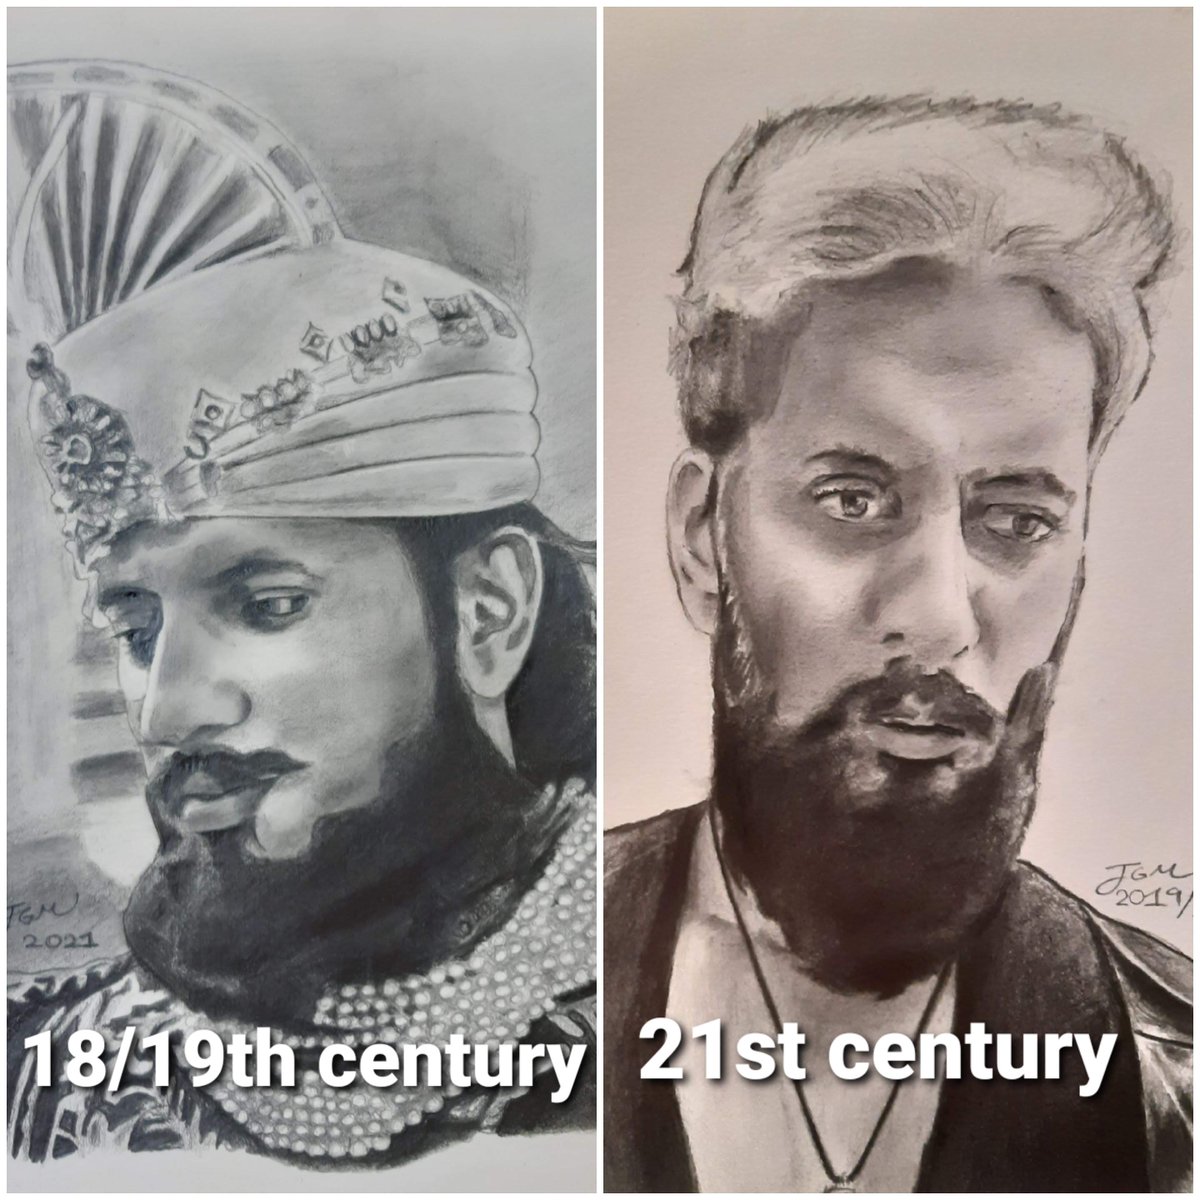 Then and Now...

#pastandpresent #pencil #Pencildrawing #drawing #art #ArtistOnTwitter #portrait #BEARD #actor #filmextra #filmcostume #costume #ancestor #doubleportrait #thenandnow #portraiture #fineart